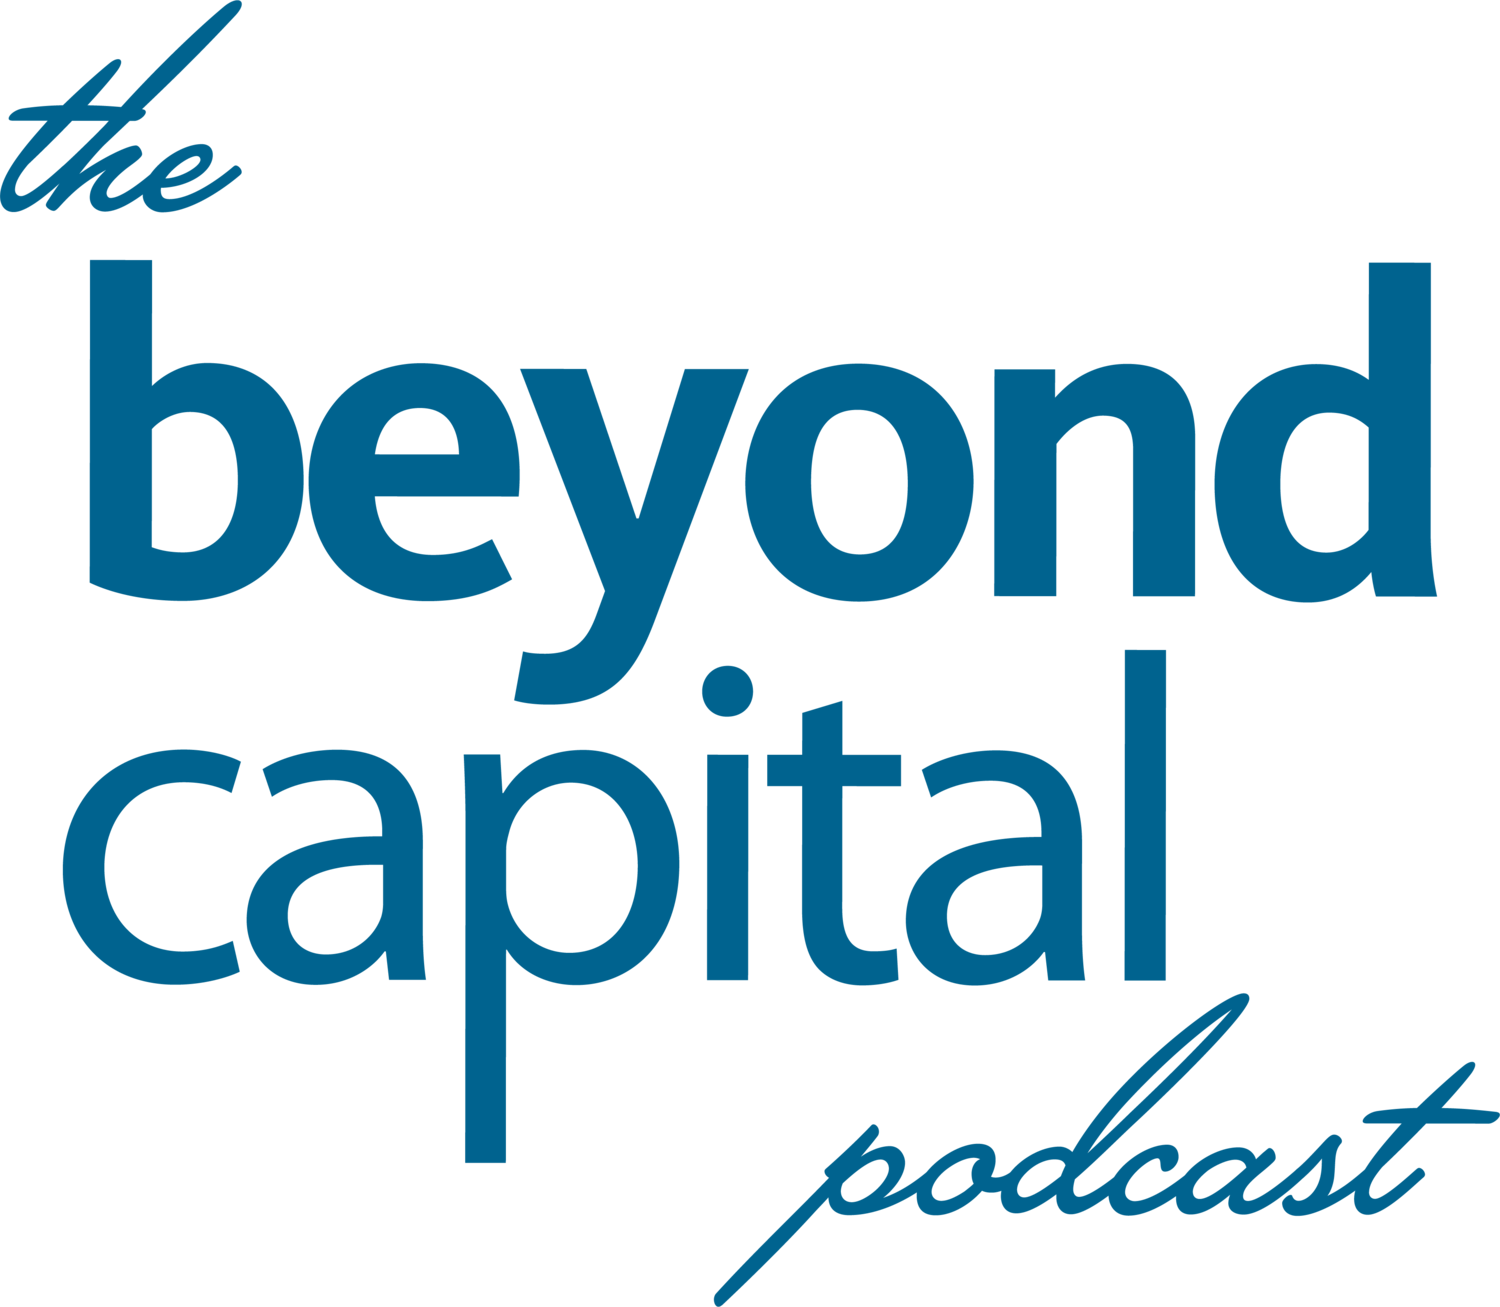 The Beyond Capital Podcast